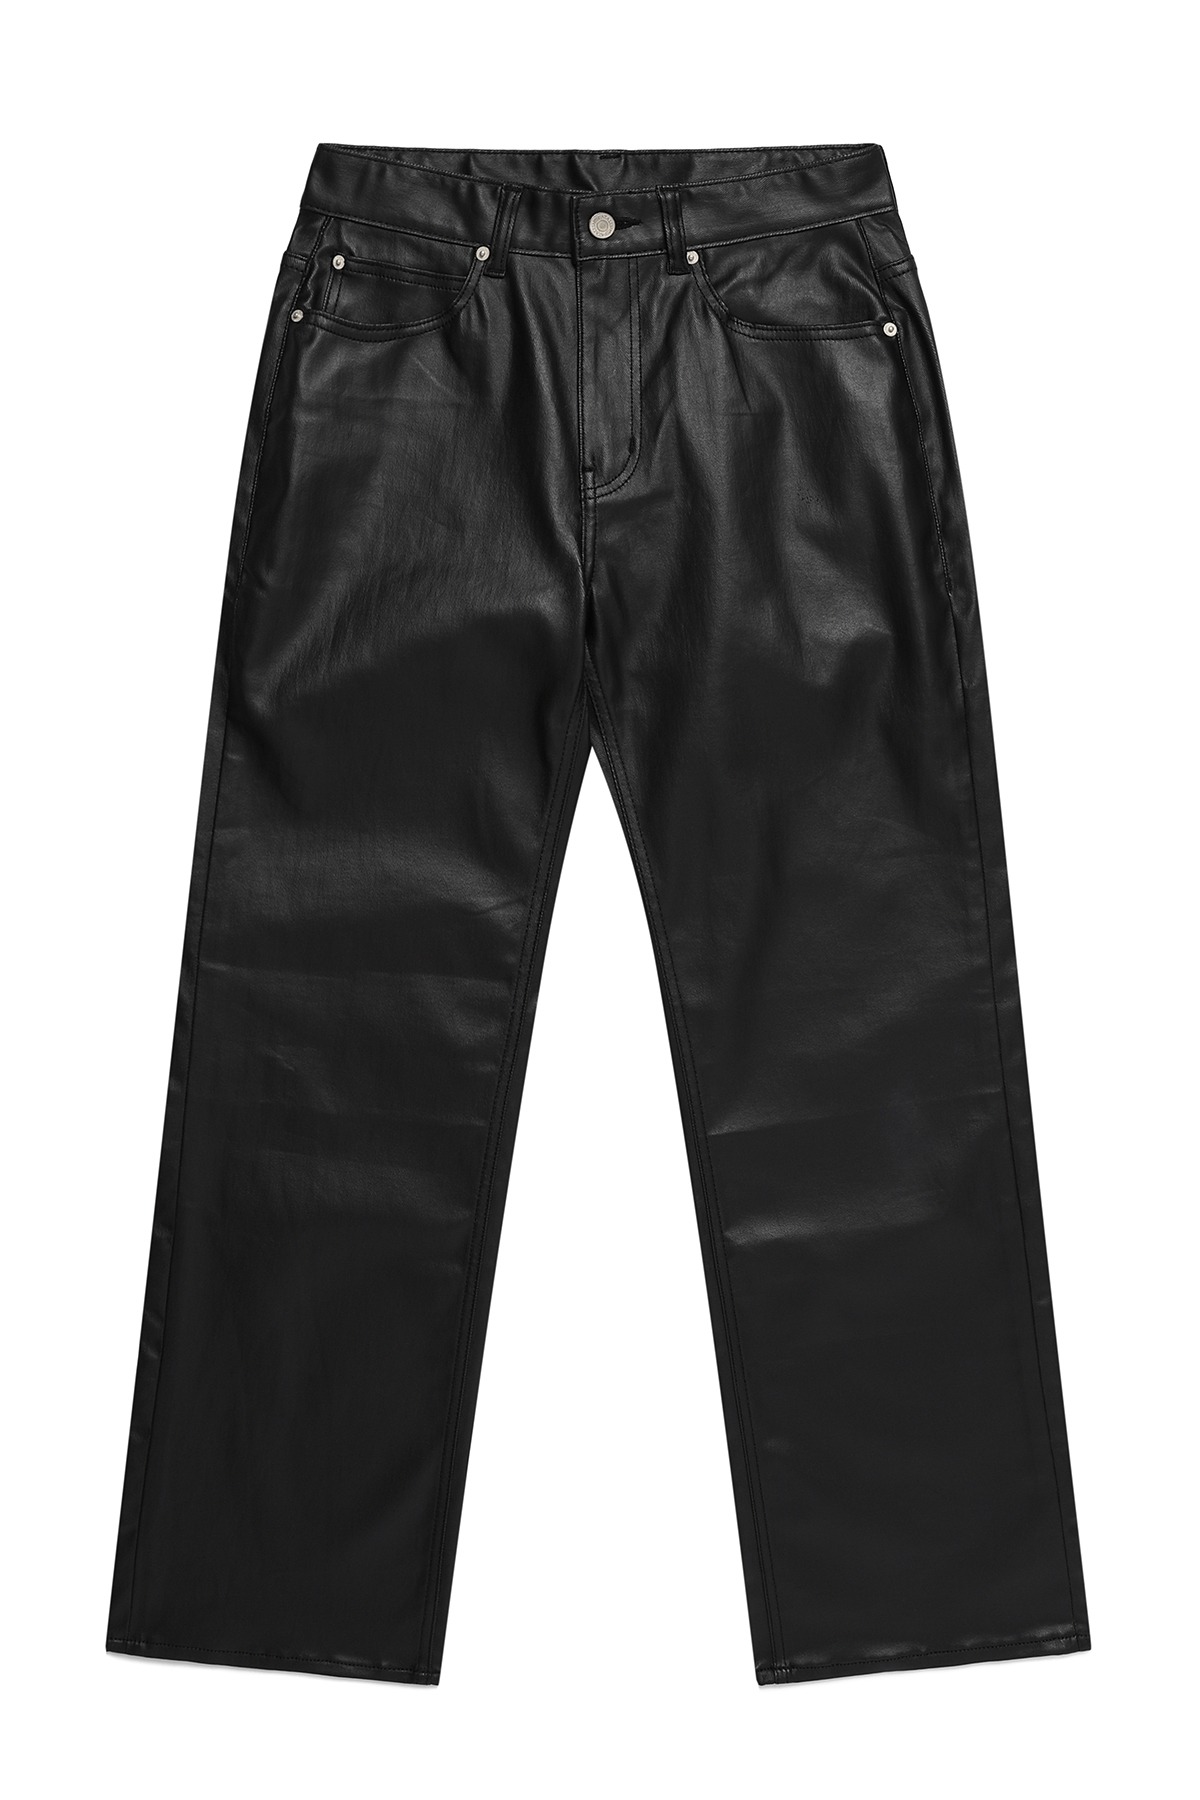 #0336 Eco Carbon coated semi wide jeans